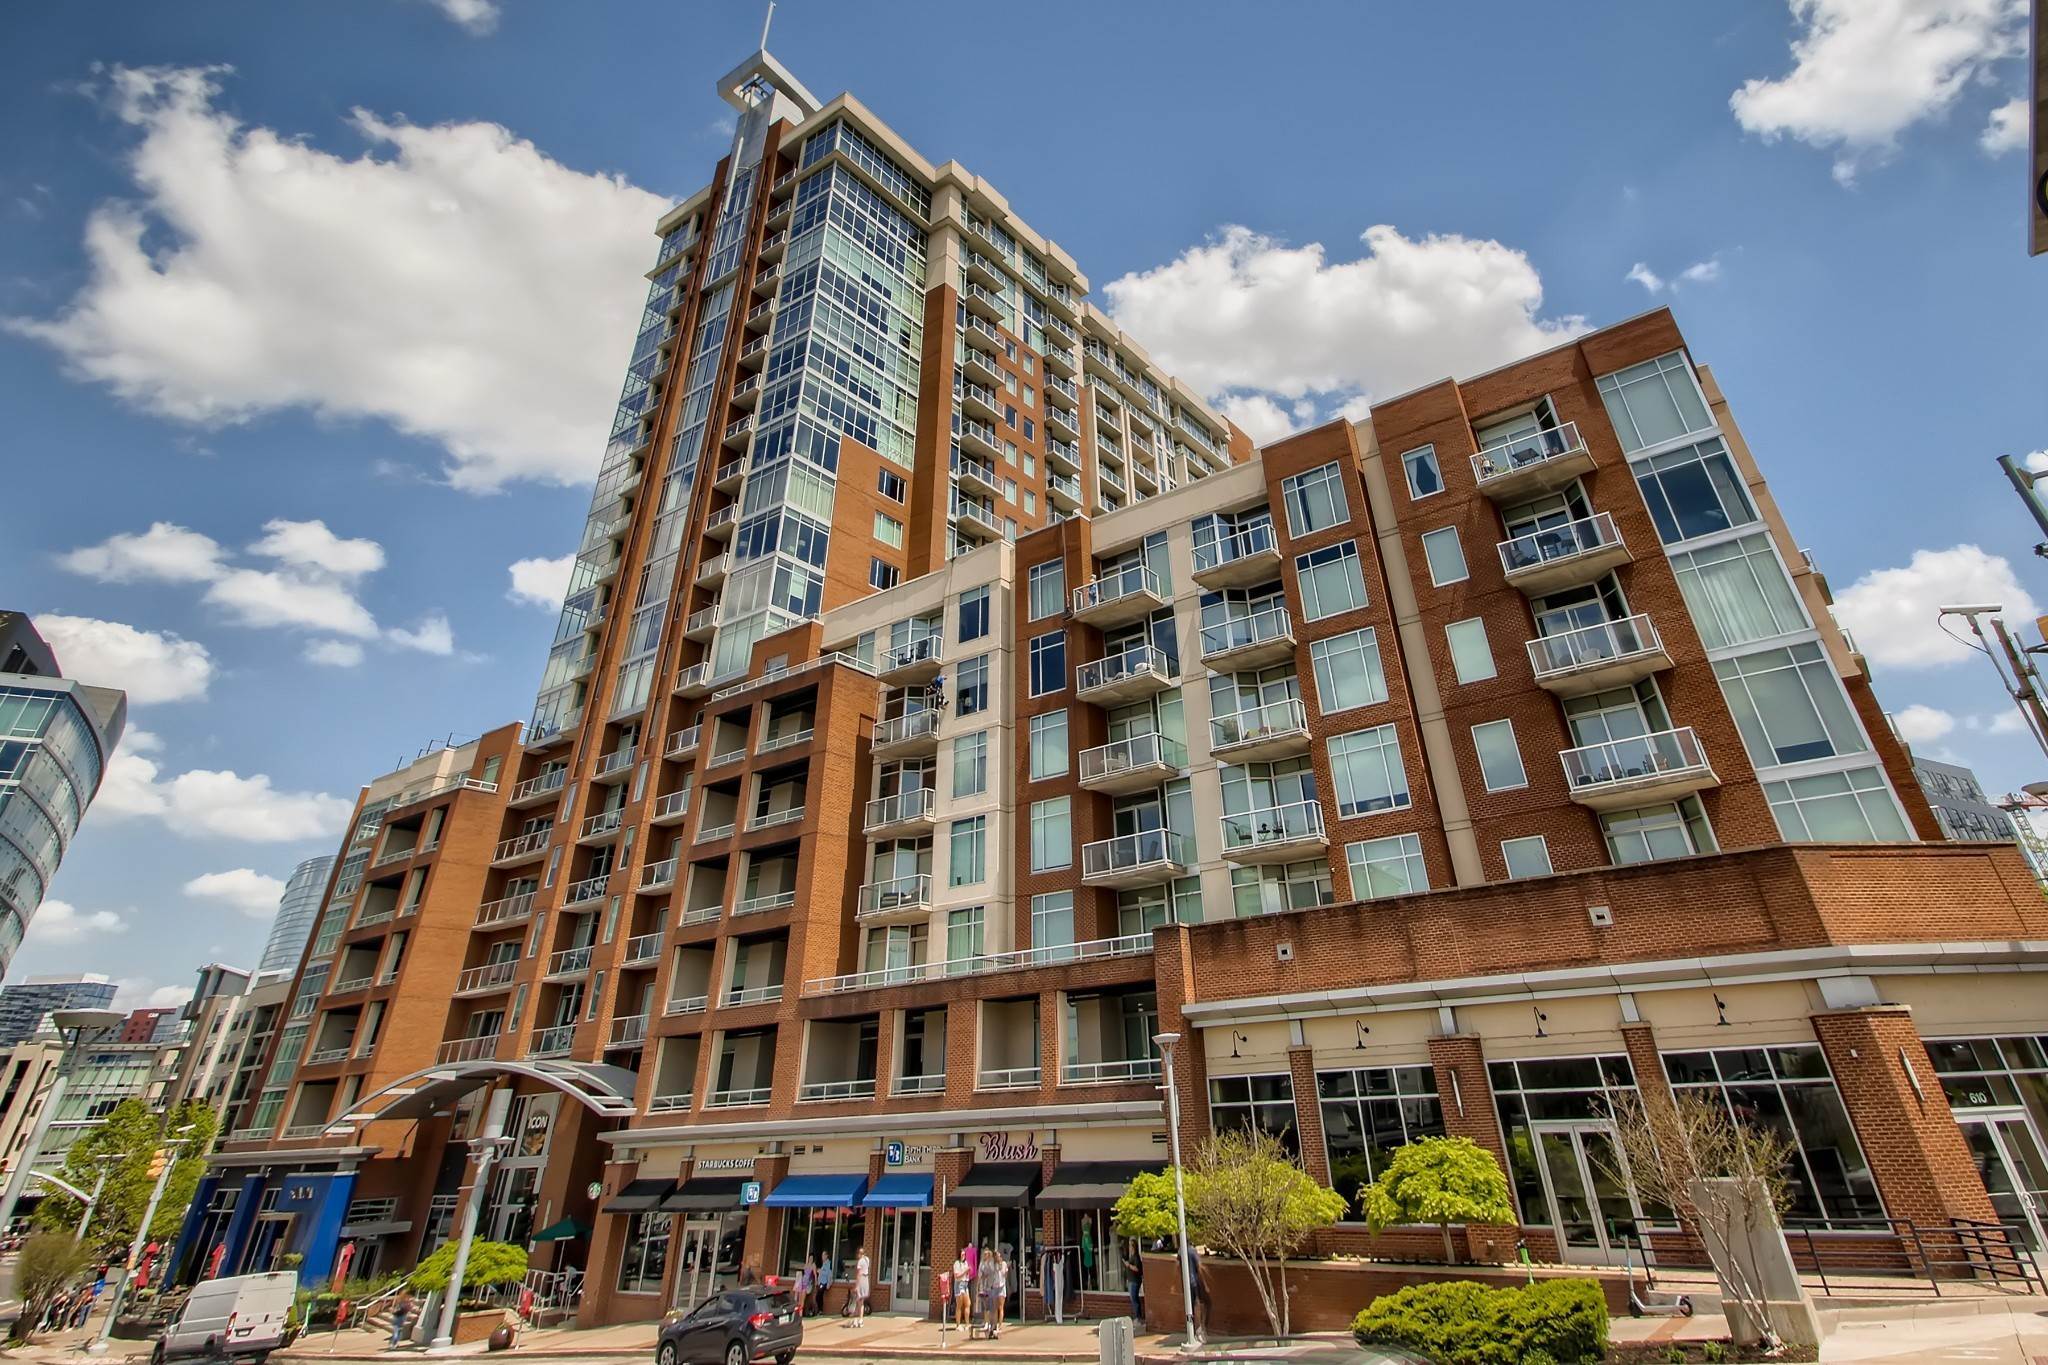 3. High Rise for Sale at 600 12th Ave, S Nashville, Tennessee 37203 United States